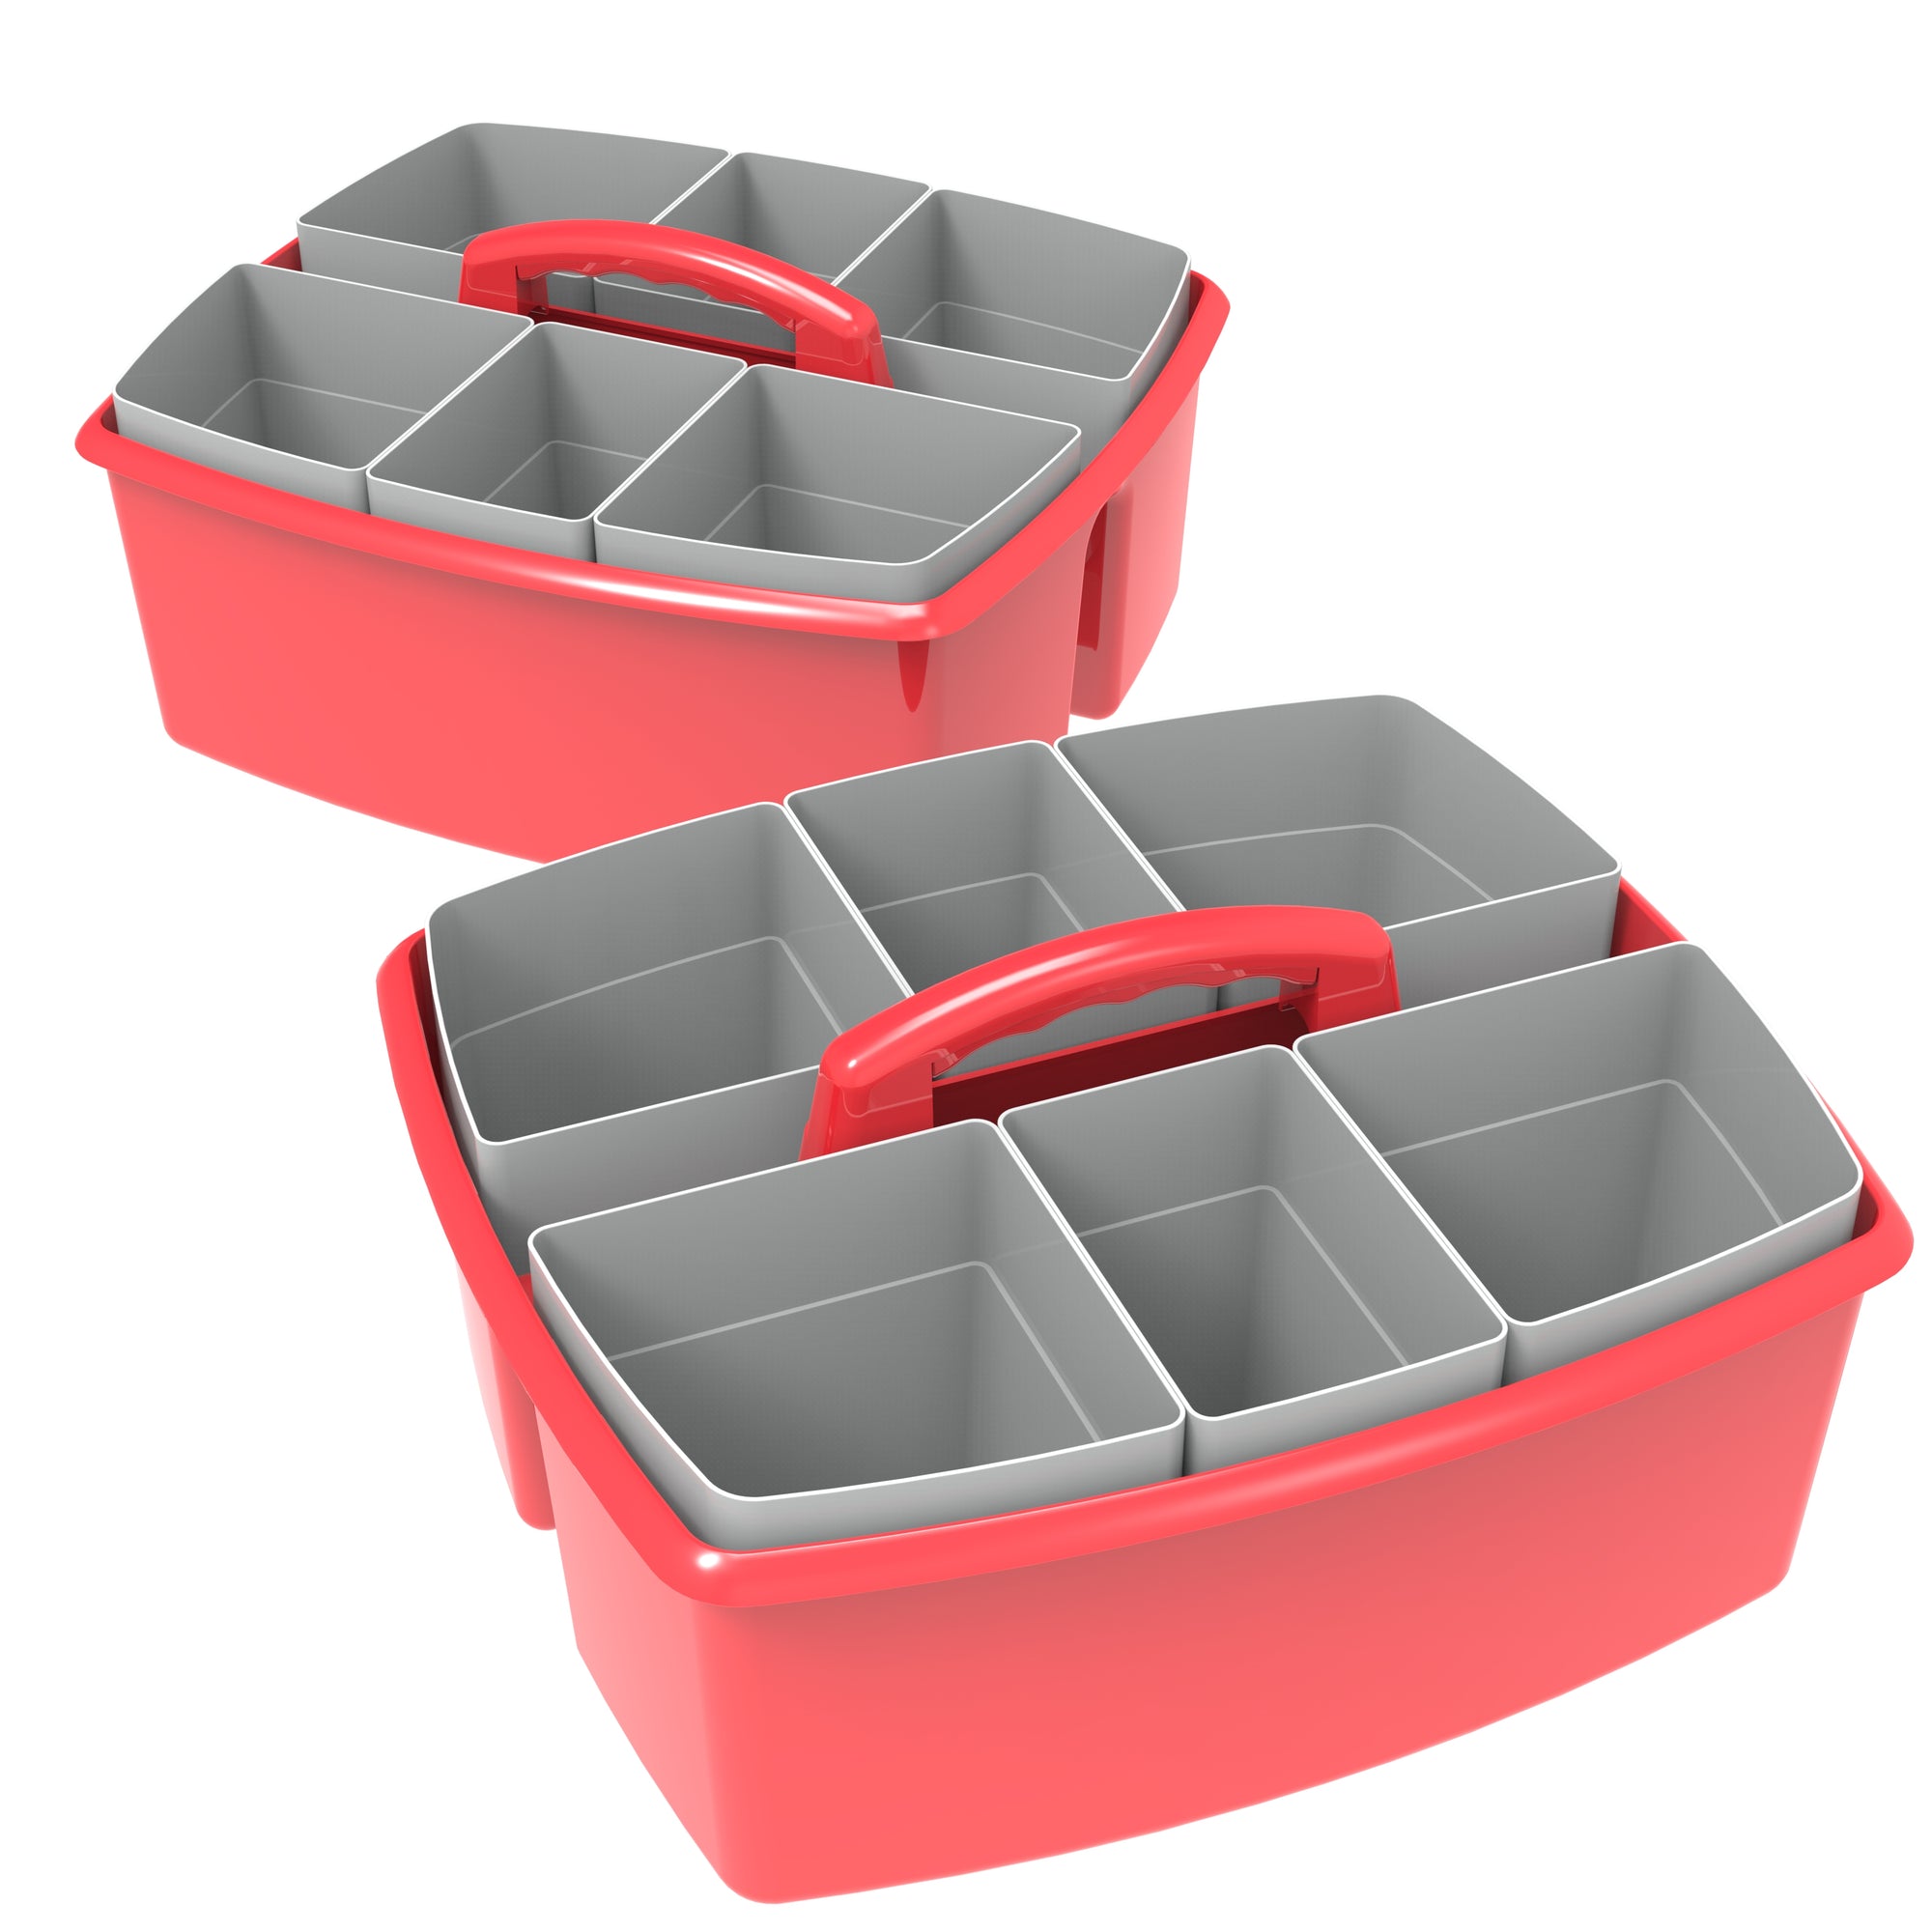 Storex Large Caddy with Sorting Cups, Red, 2-Pack